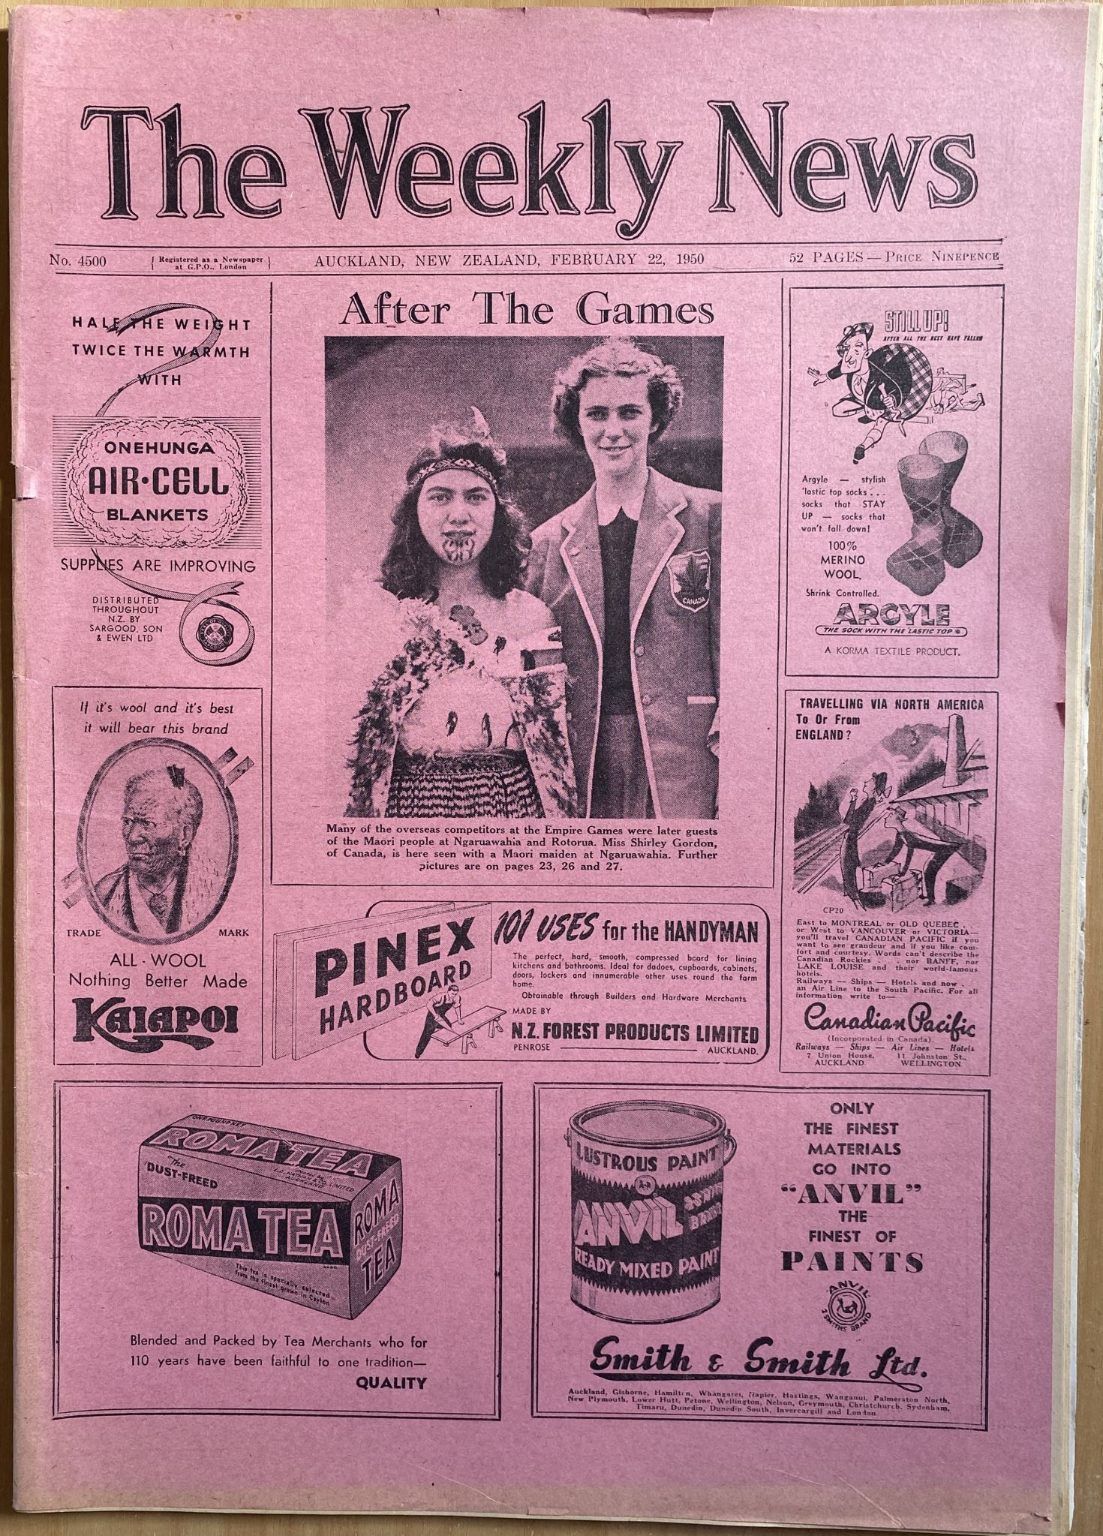 OLD NEWSPAPER: The Weekly News, No. 4500, 22 February 1950